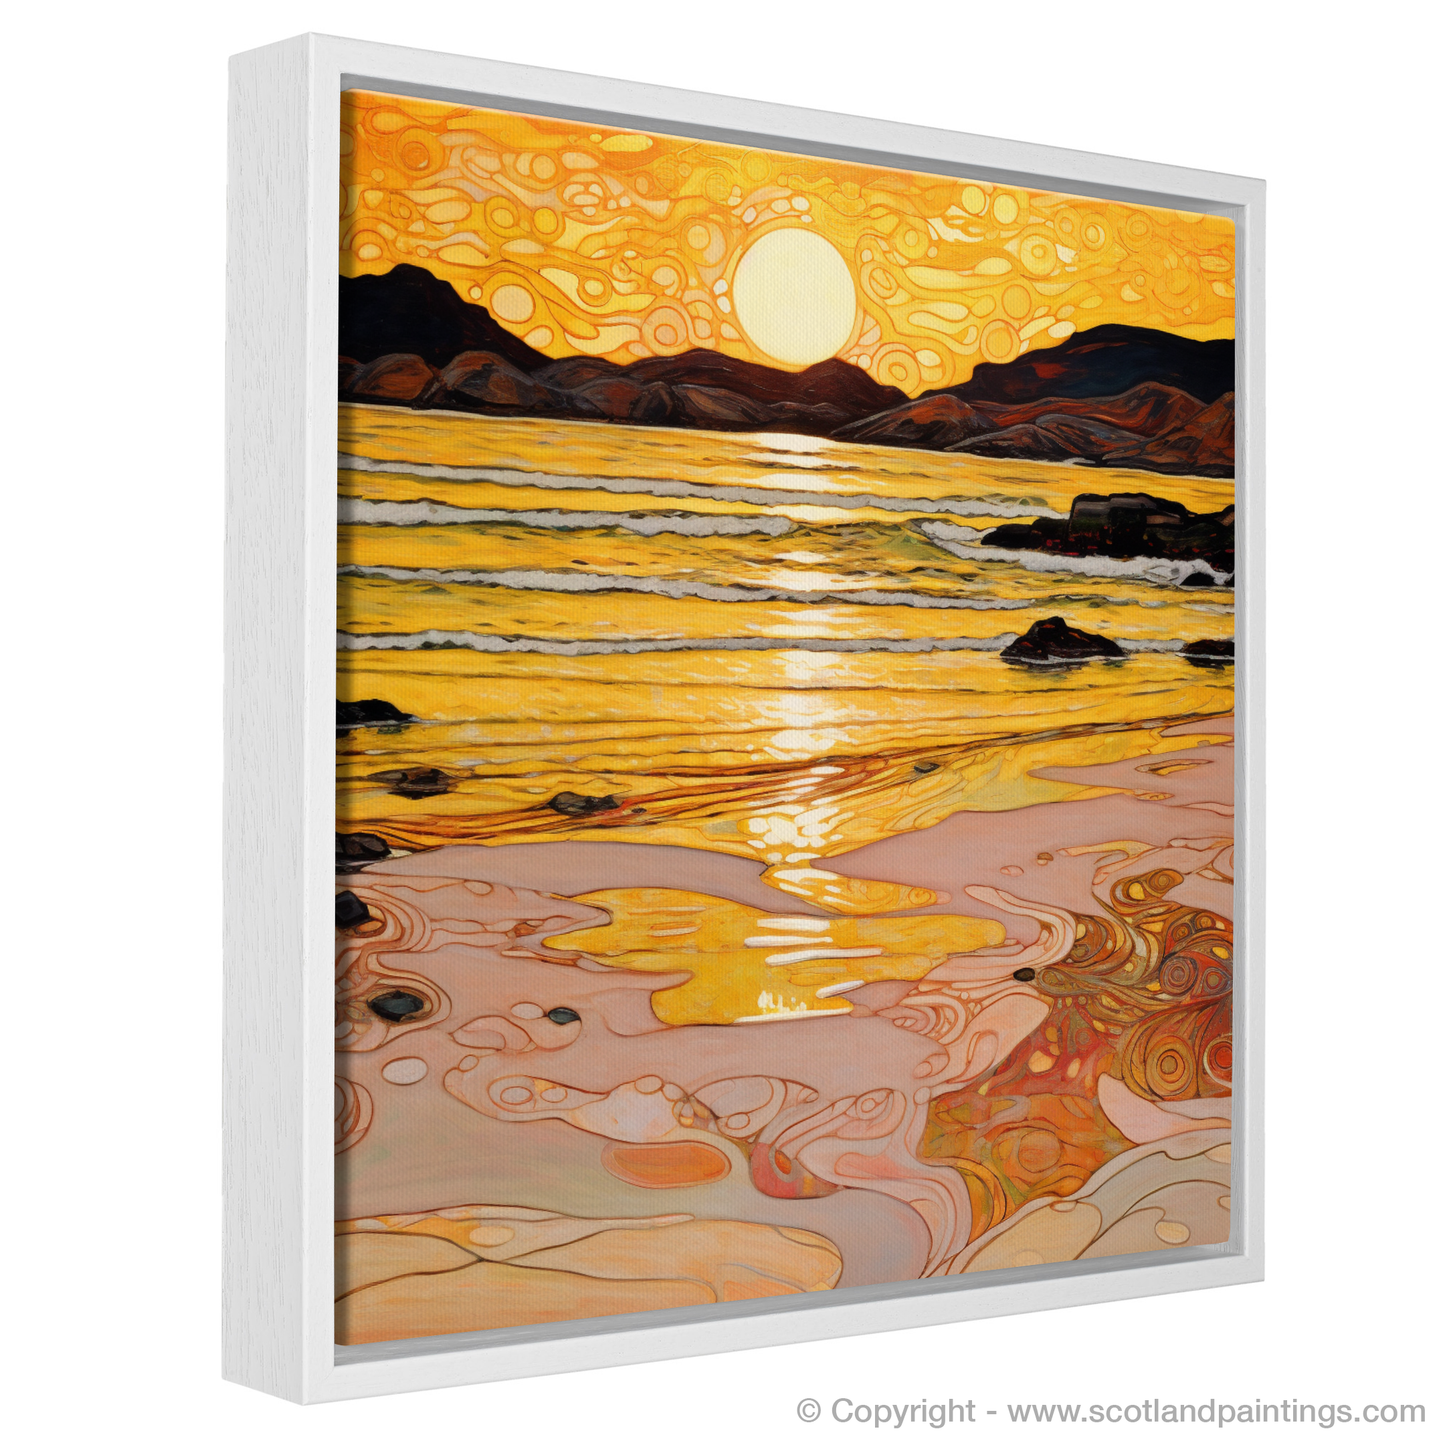 Golden Twilight at Traigh Mhor: An Art Nouveau Ode to Scottish Coves